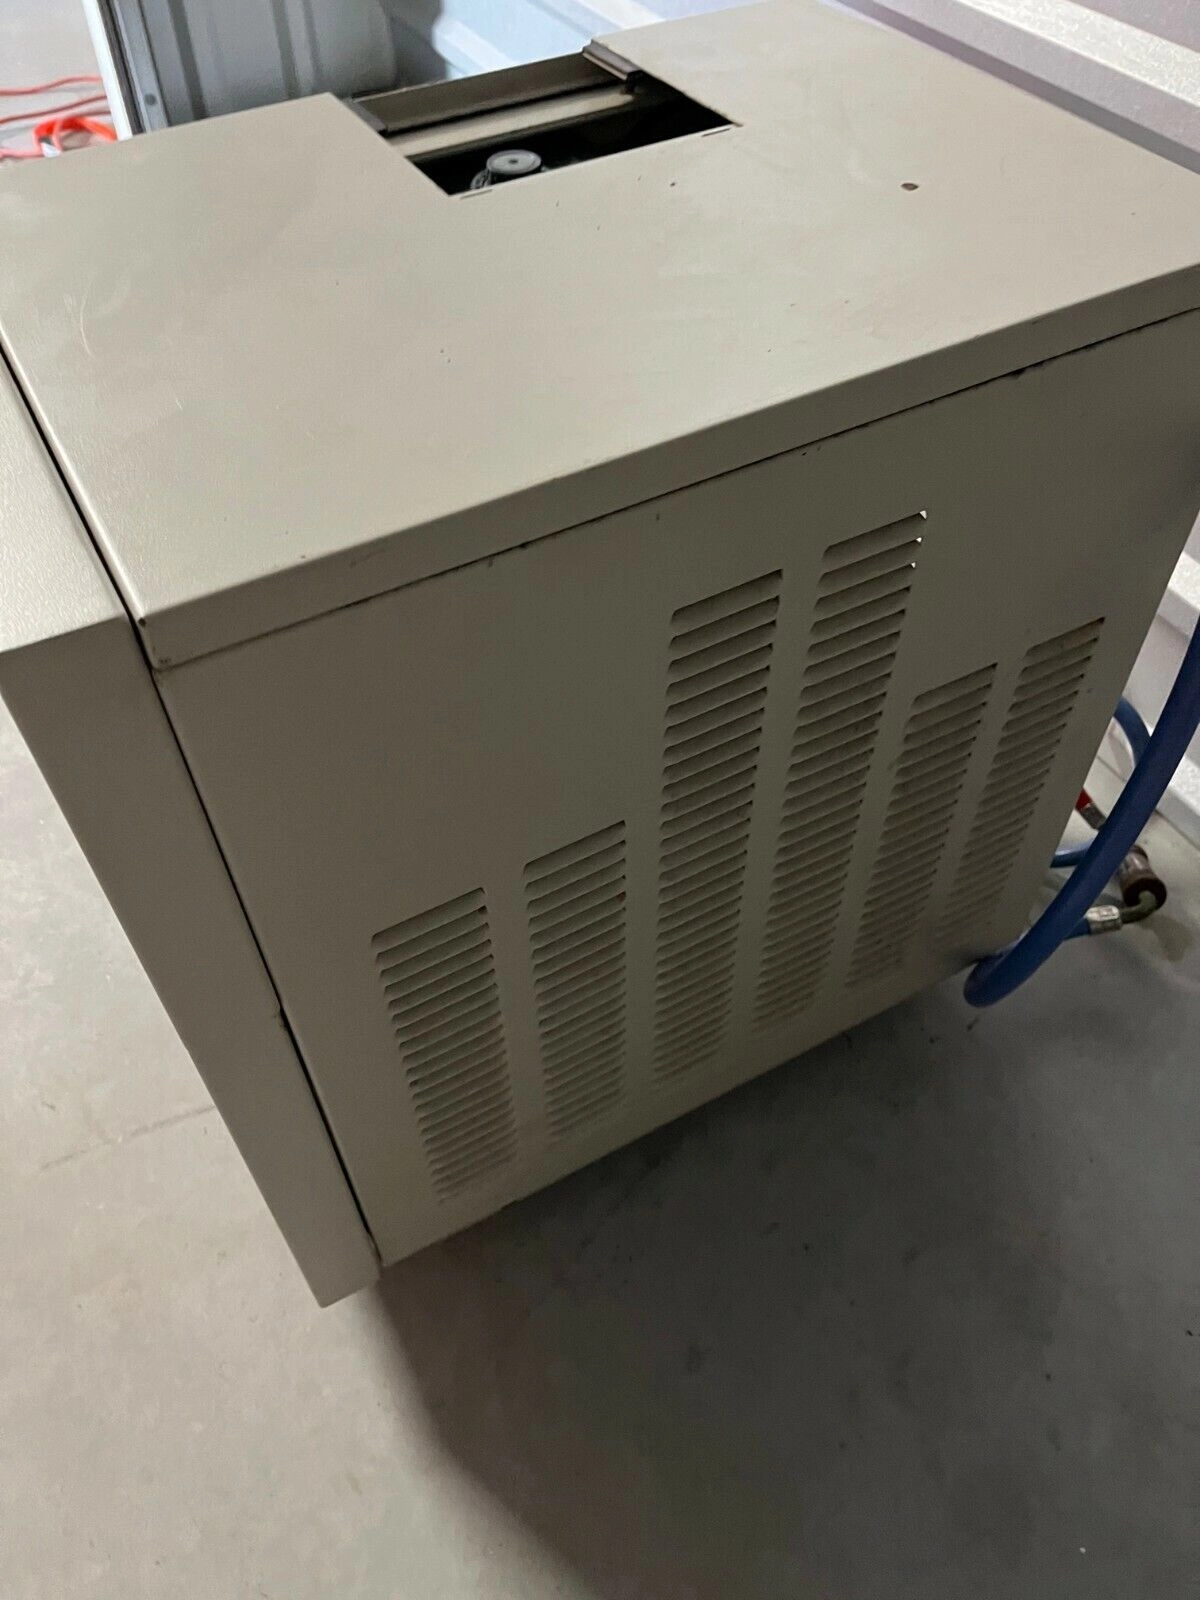 Labtech H150-1000 Recirculating Water Chiller HAS 